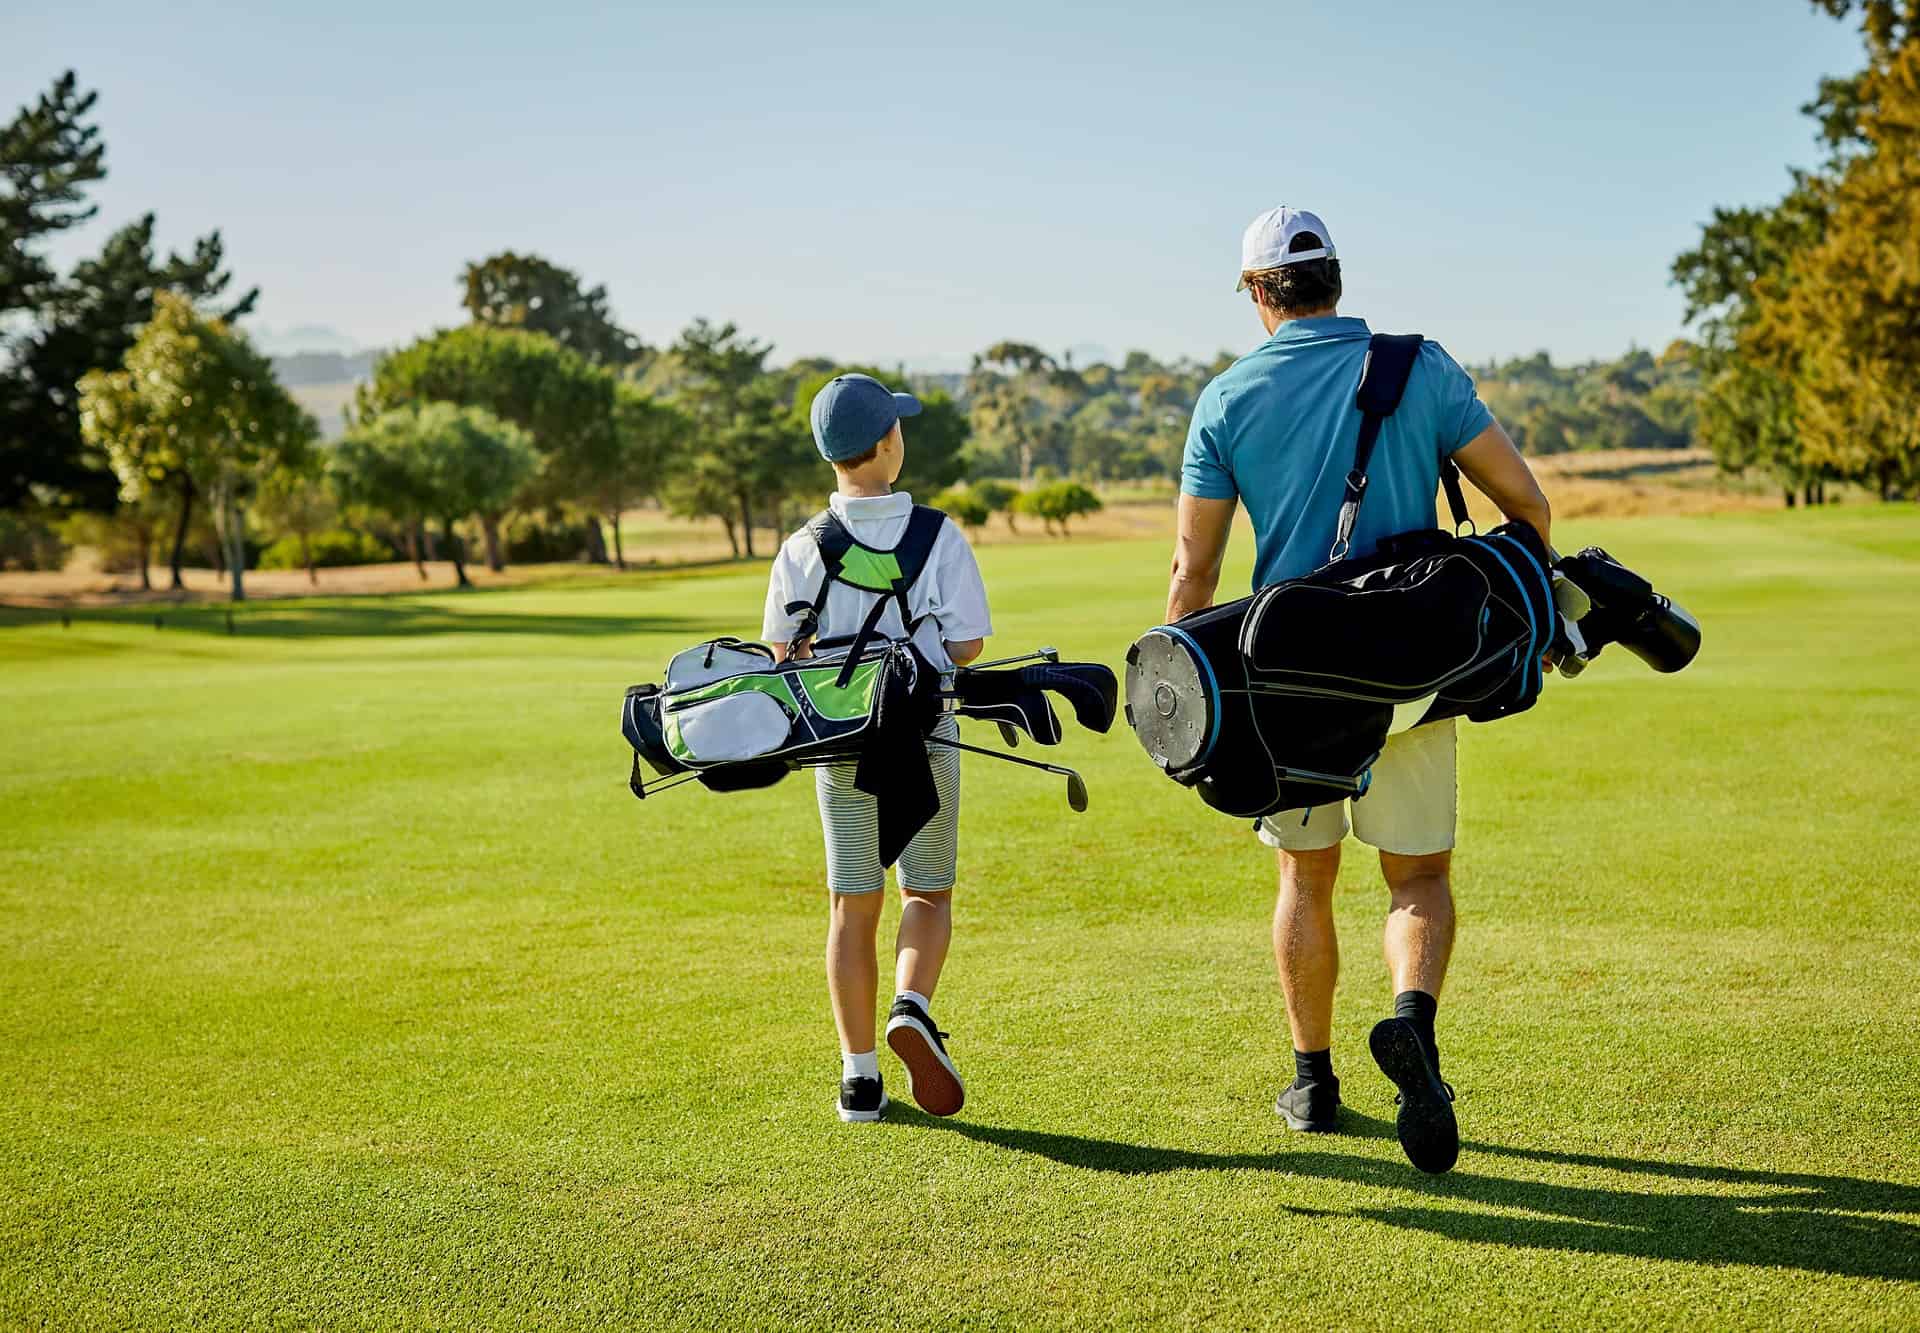 Hobbies That Will Take Your Golf Game to the Next Level